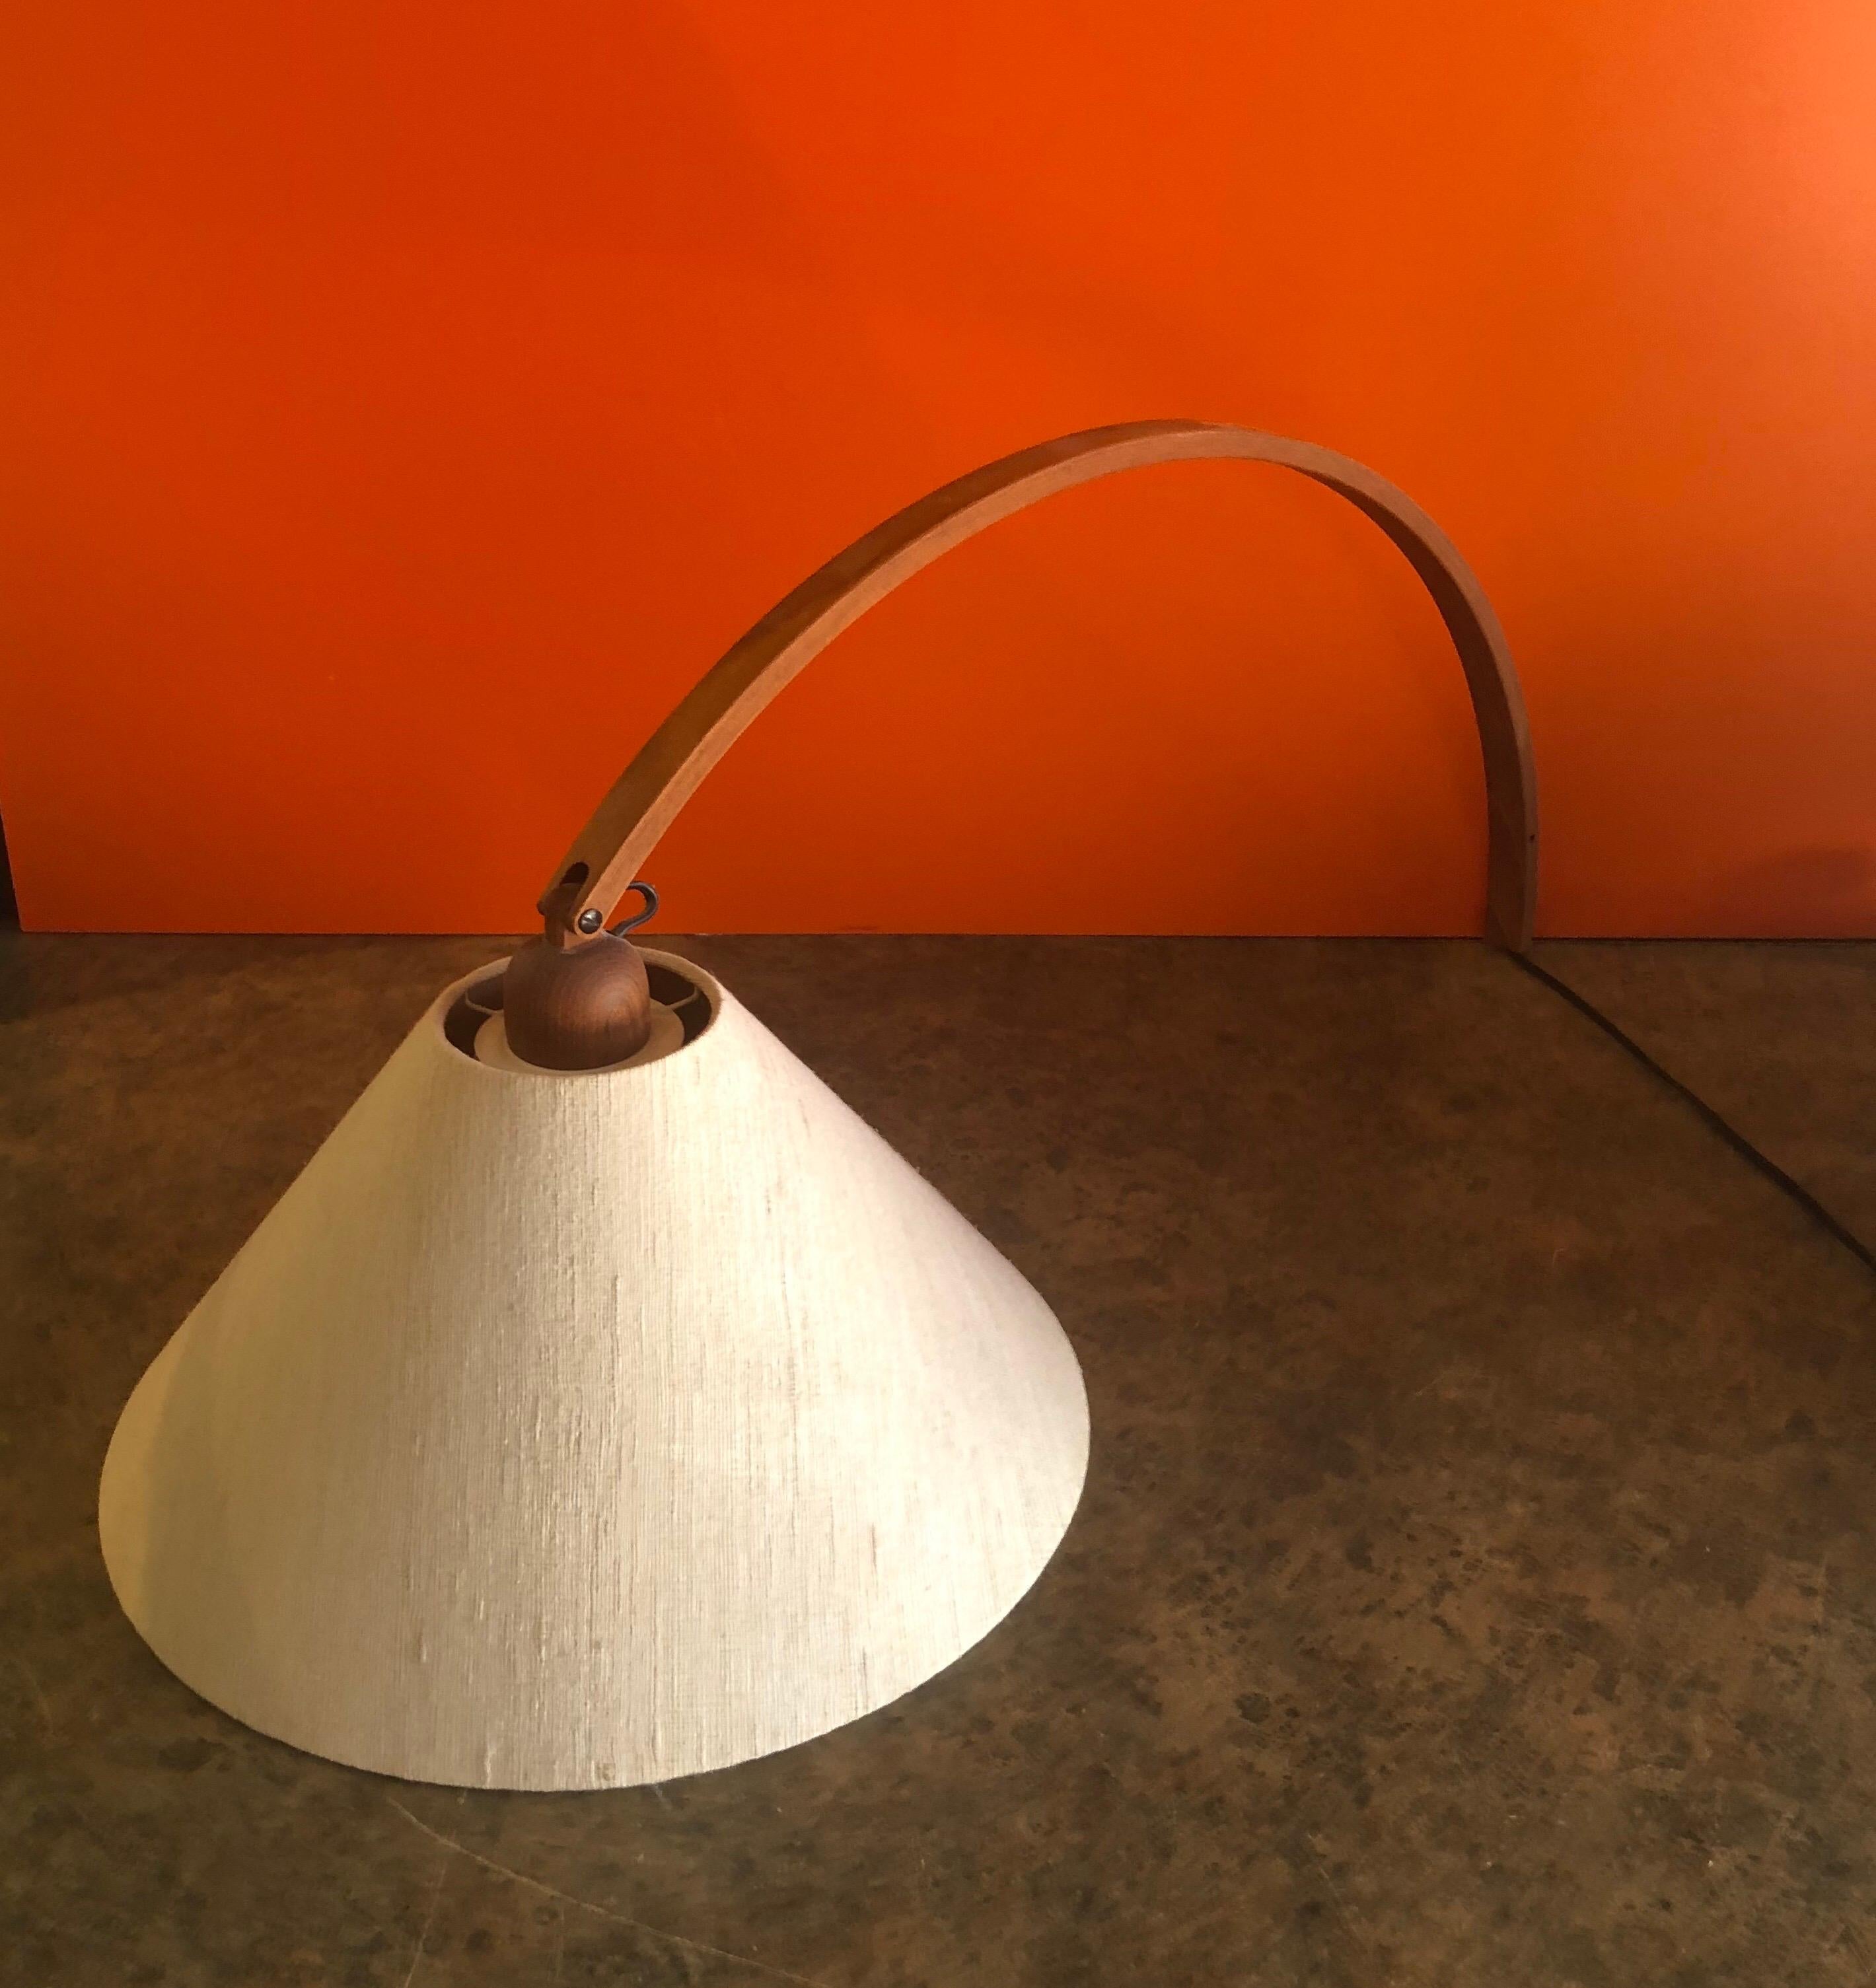 A very cool and rare MCM arched teak multi-Directional wall lamp or sconce, circa 1960s. The arched lamp can rotate 180 degrees left and right and move up and down on the 29